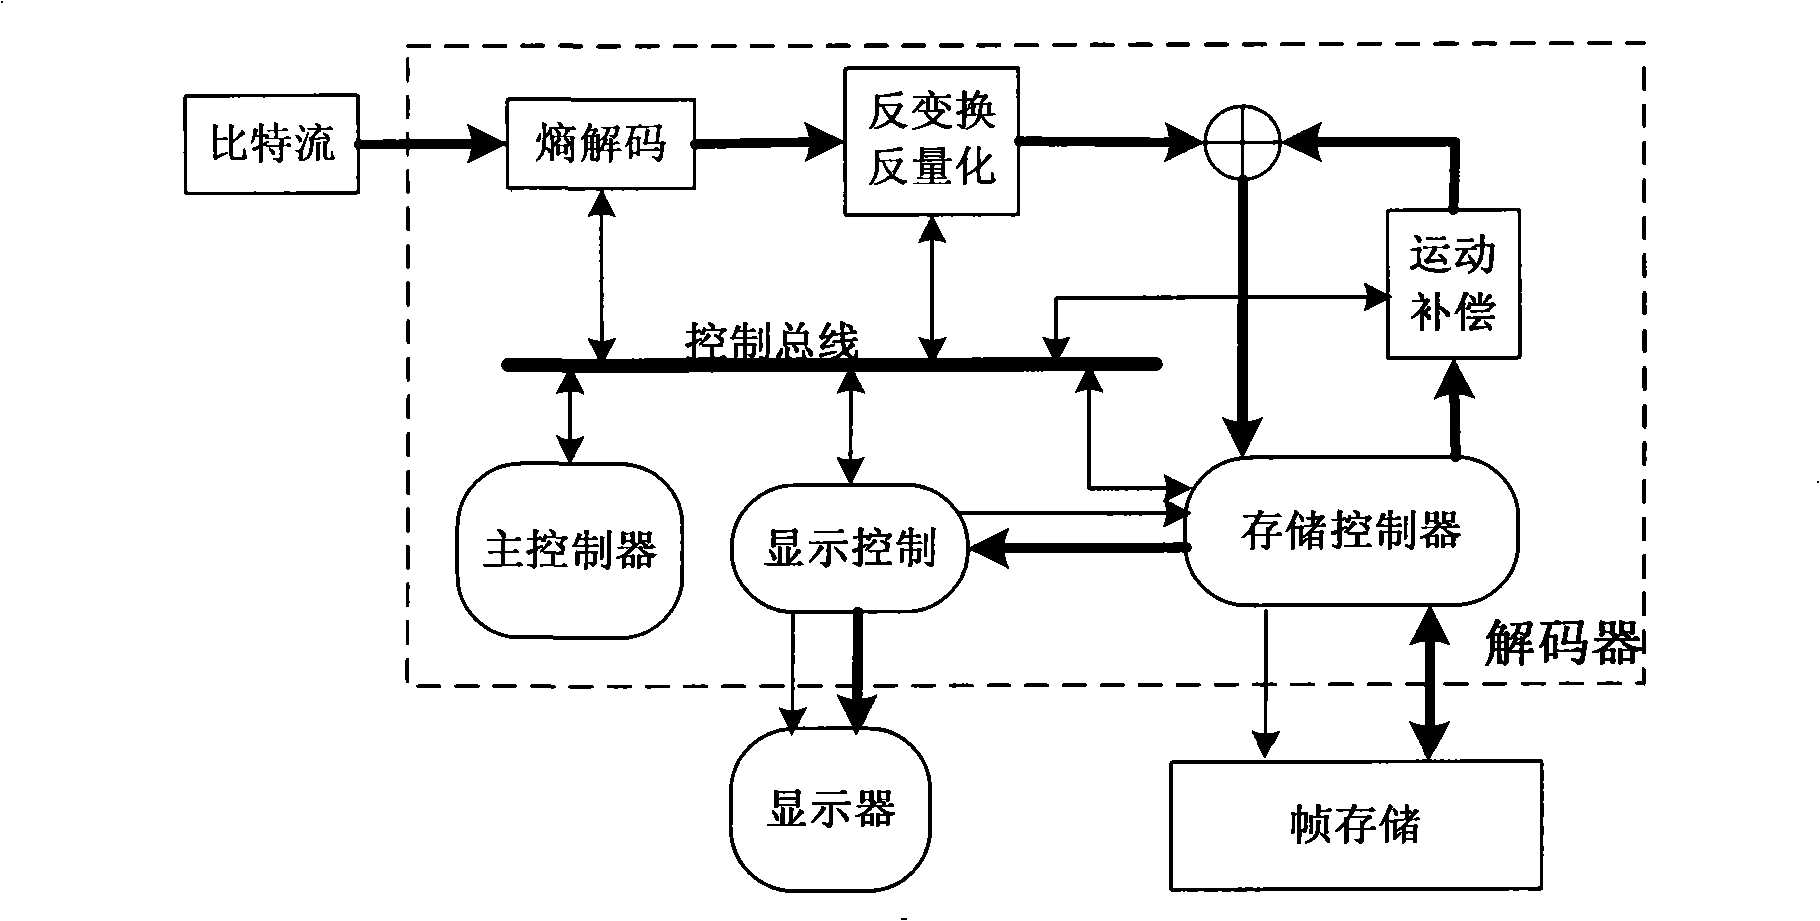 Storing system of integrated video decoder